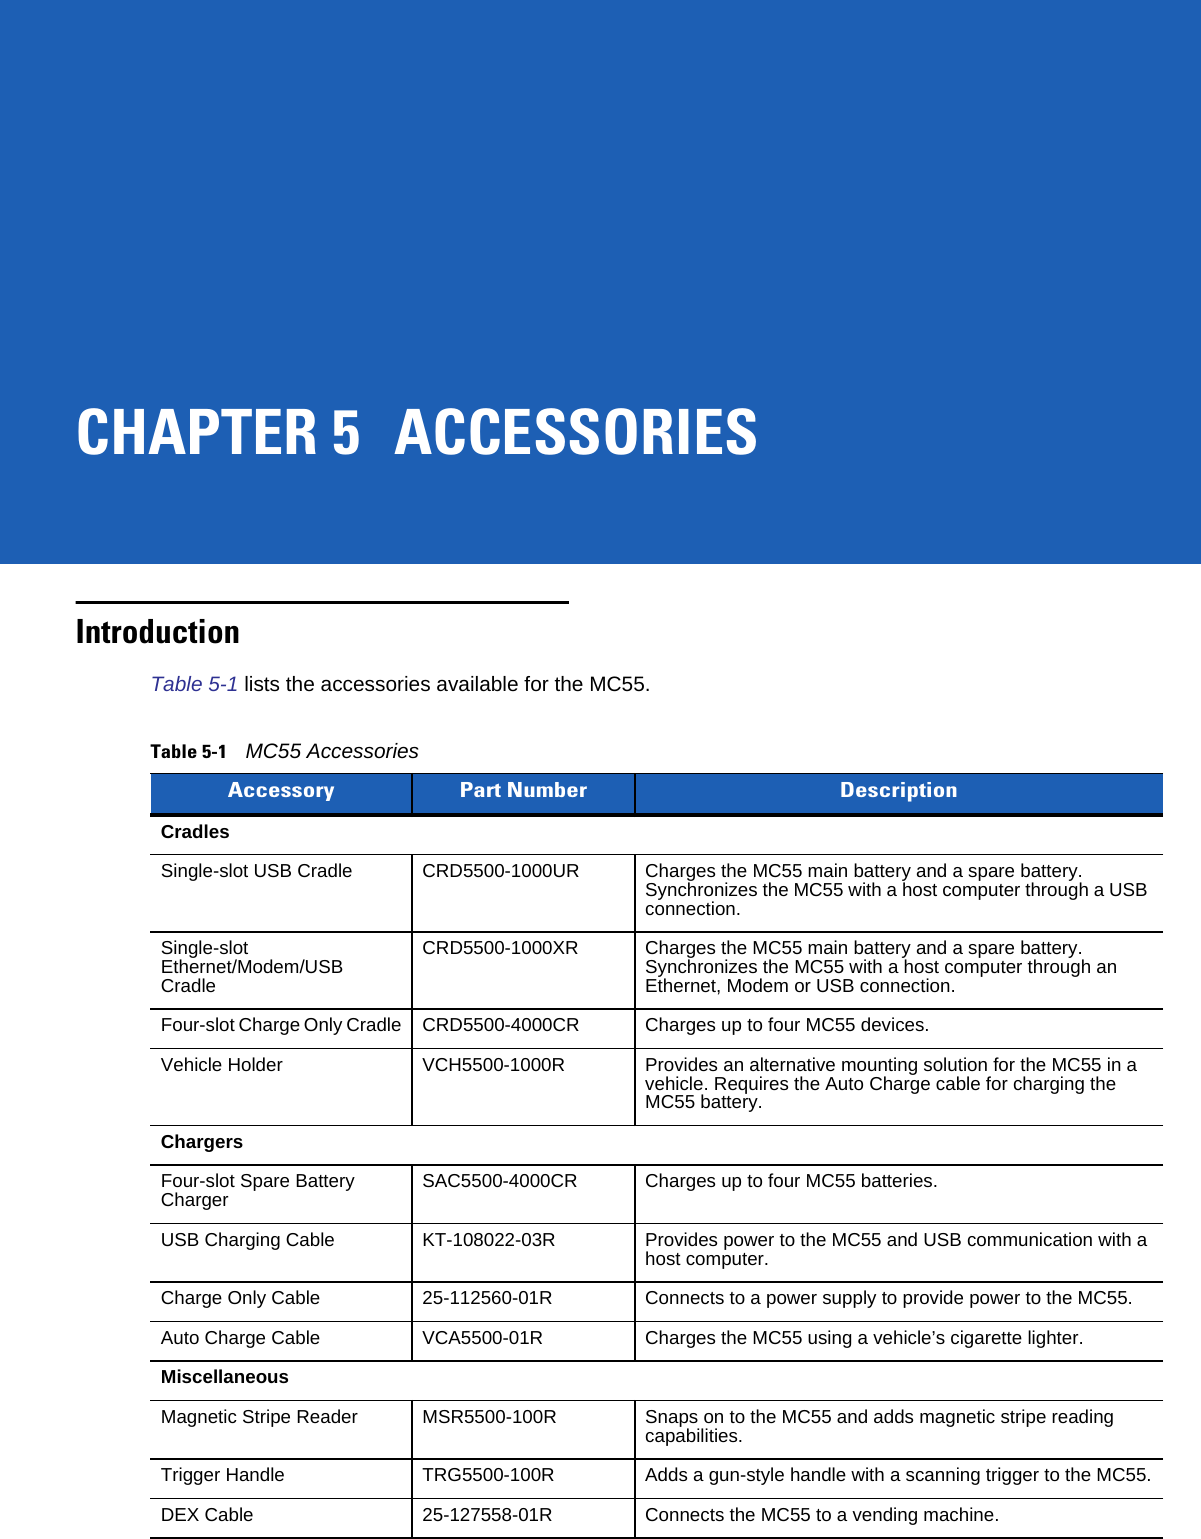 CHAPTER 5 ACCESSORIESIntroductionTable 5-1 lists the accessories available for the MC55.Table 5-1MC55 Accessories Accessory Part Number DescriptionCradlesSingle-slot USB Cradle CRD5500-1000UR Charges the MC55 main battery and a spare battery. Synchronizes the MC55 with a host computer through a USB connection.Single-slot Ethernet/Modem/USB CradleCRD5500-1000XR Charges the MC55 main battery and a spare battery. Synchronizes the MC55 with a host computer through an Ethernet, Modem or USB connection.Four-slot Charge Only Cradle CRD5500-4000CR Charges up to four MC55 devices.Vehicle Holder VCH5500-1000R Provides an alternative mounting solution for the MC55 in a vehicle. Requires the Auto Charge cable for charging the MC55 battery.ChargersFour-slot Spare Battery Charger SAC5500-4000CR Charges up to four MC55 batteries.USB Charging Cable KT-108022-03R Provides power to the MC55 and USB communication with a host computer.Charge Only Cable 25-112560-01R Connects to a power supply to provide power to the MC55.Auto Charge Cable VCA5500-01R Charges the MC55 using a vehicle’s cigarette lighter.MiscellaneousMagnetic Stripe Reader MSR5500-100R Snaps on to the MC55 and adds magnetic stripe reading capabilities.Trigger Handle TRG5500-100R Adds a gun-style handle with a scanning trigger to the MC55.DEX Cable 25-127558-01R Connects the MC55 to a vending machine.